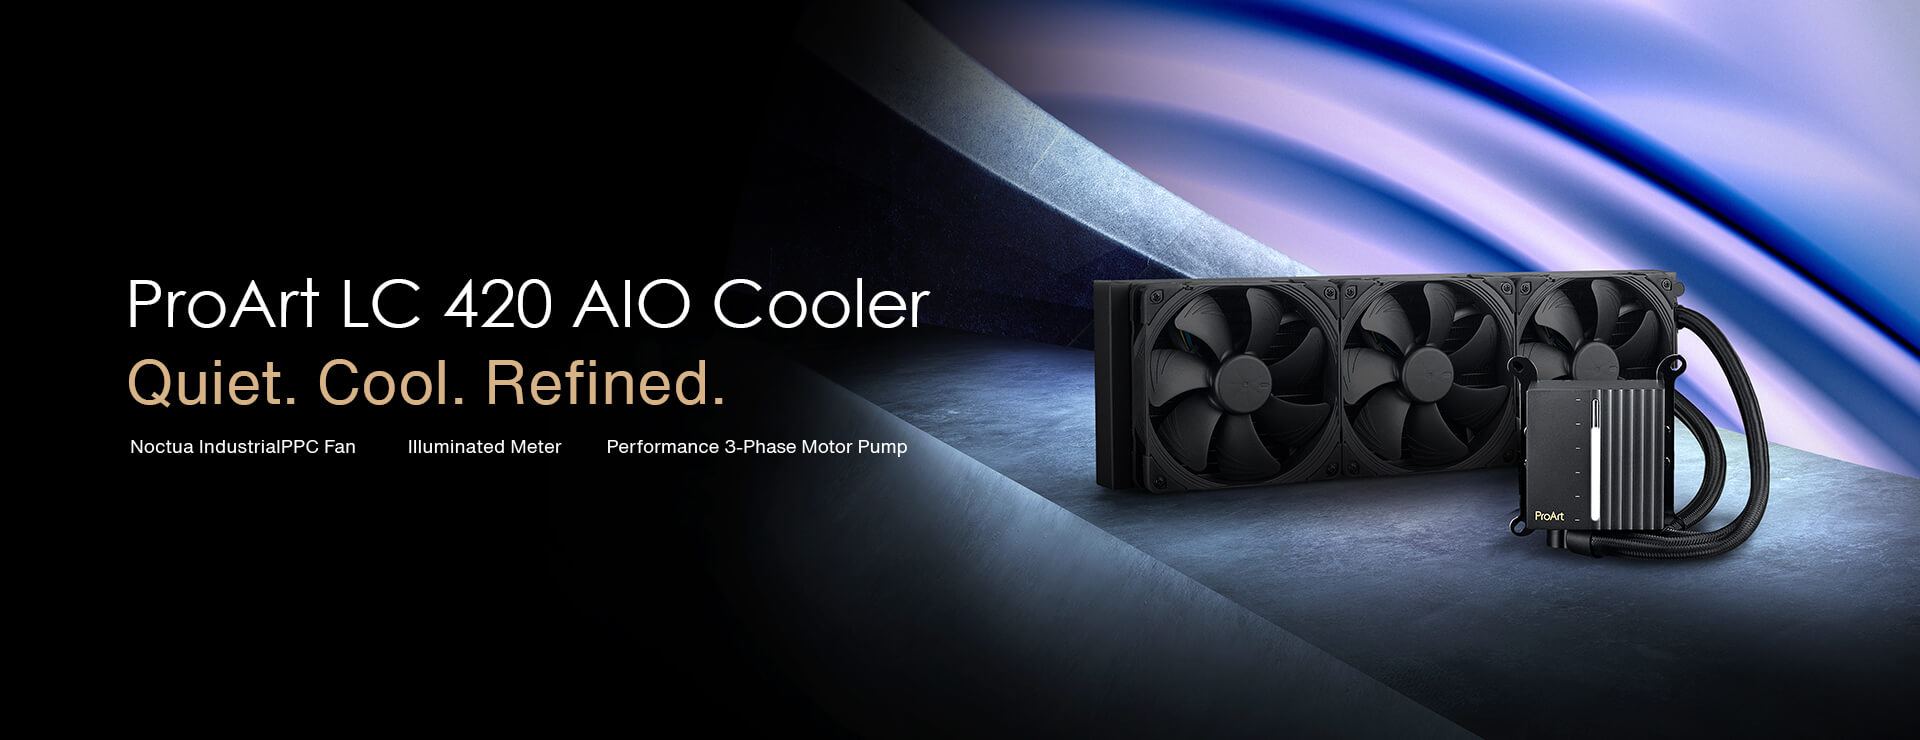 ProArt LC 420 AIO Cooler. Quiet. Cool. Refined. With Noctua IndustrialPPC Fan, Illuminated Meter, and Performance 3-Phase Motor Pump.